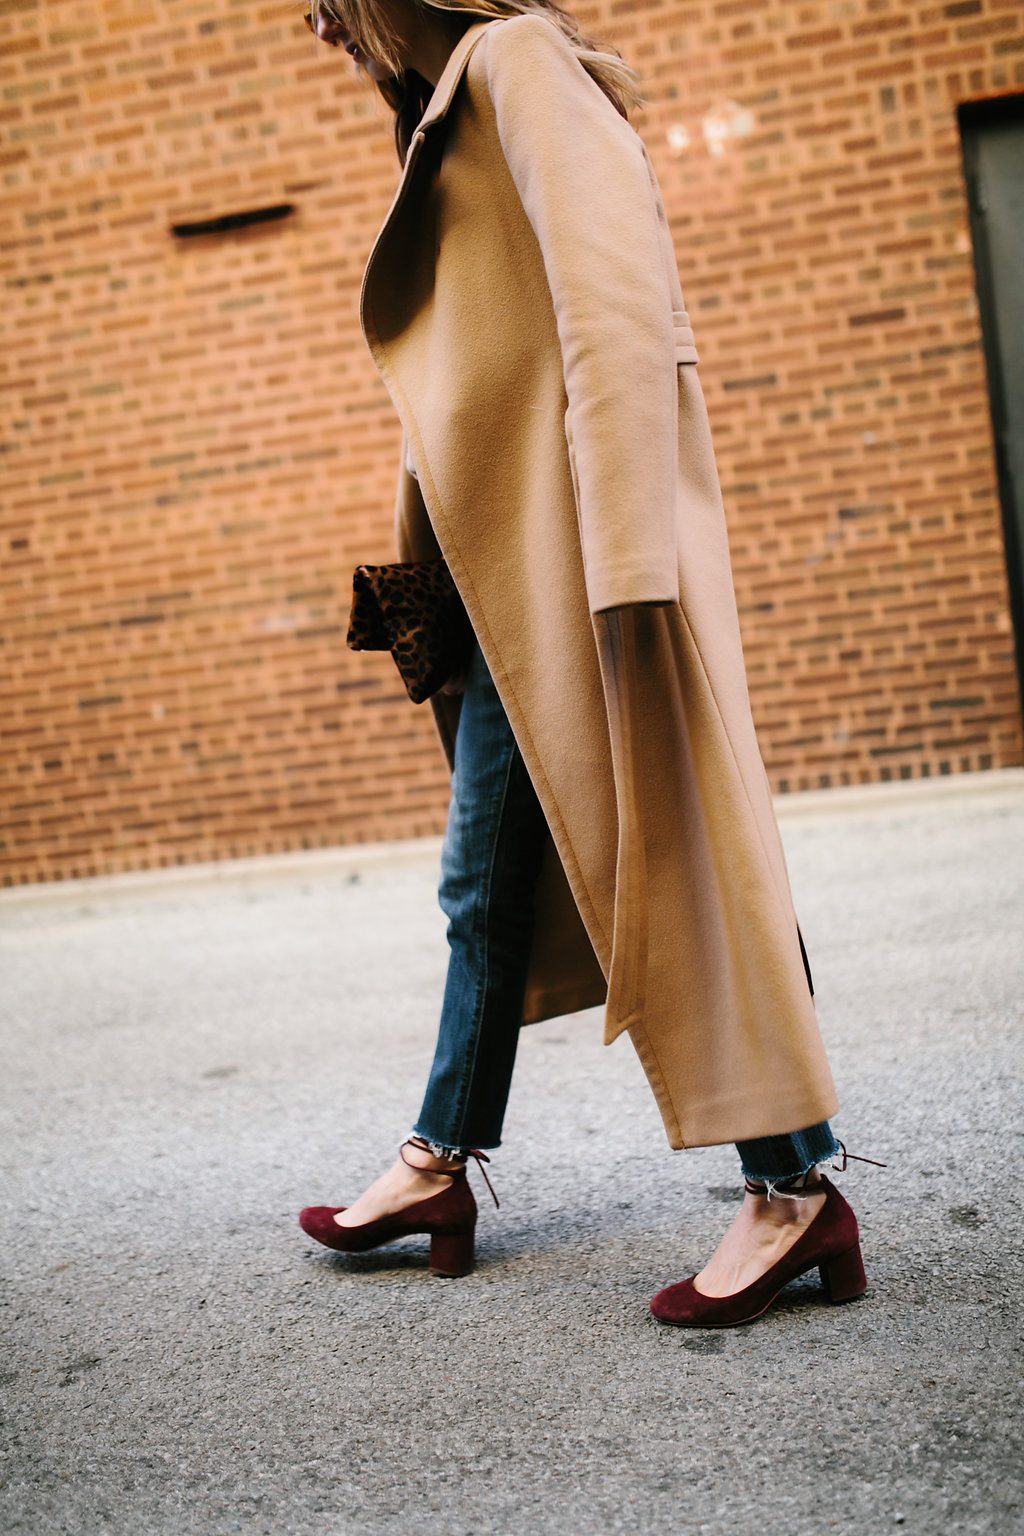 camel coat outfit for winter: the monochromatic trend